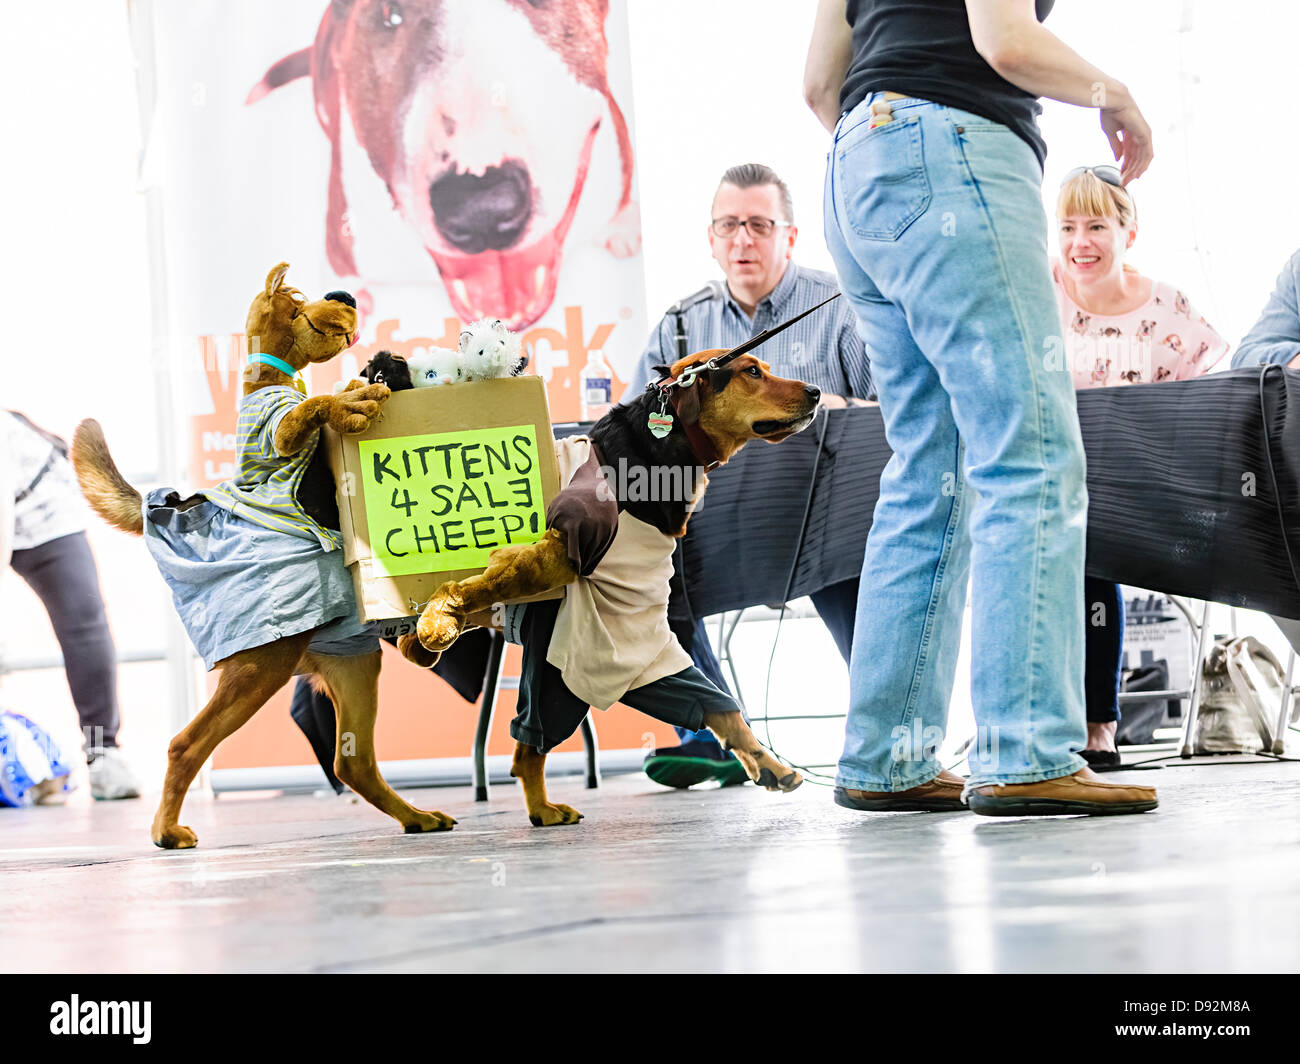 Toronto, Canada, June 9, 2013. Dog wearing costume as dogs selling kittens in box at Woofstock dog festival Best Costume contest. Movie critic Richard Crouse and comedian Laurie Elliott watch from judging table. Credit:  Elena Elisseeva/Alamy Live News Stock Photo